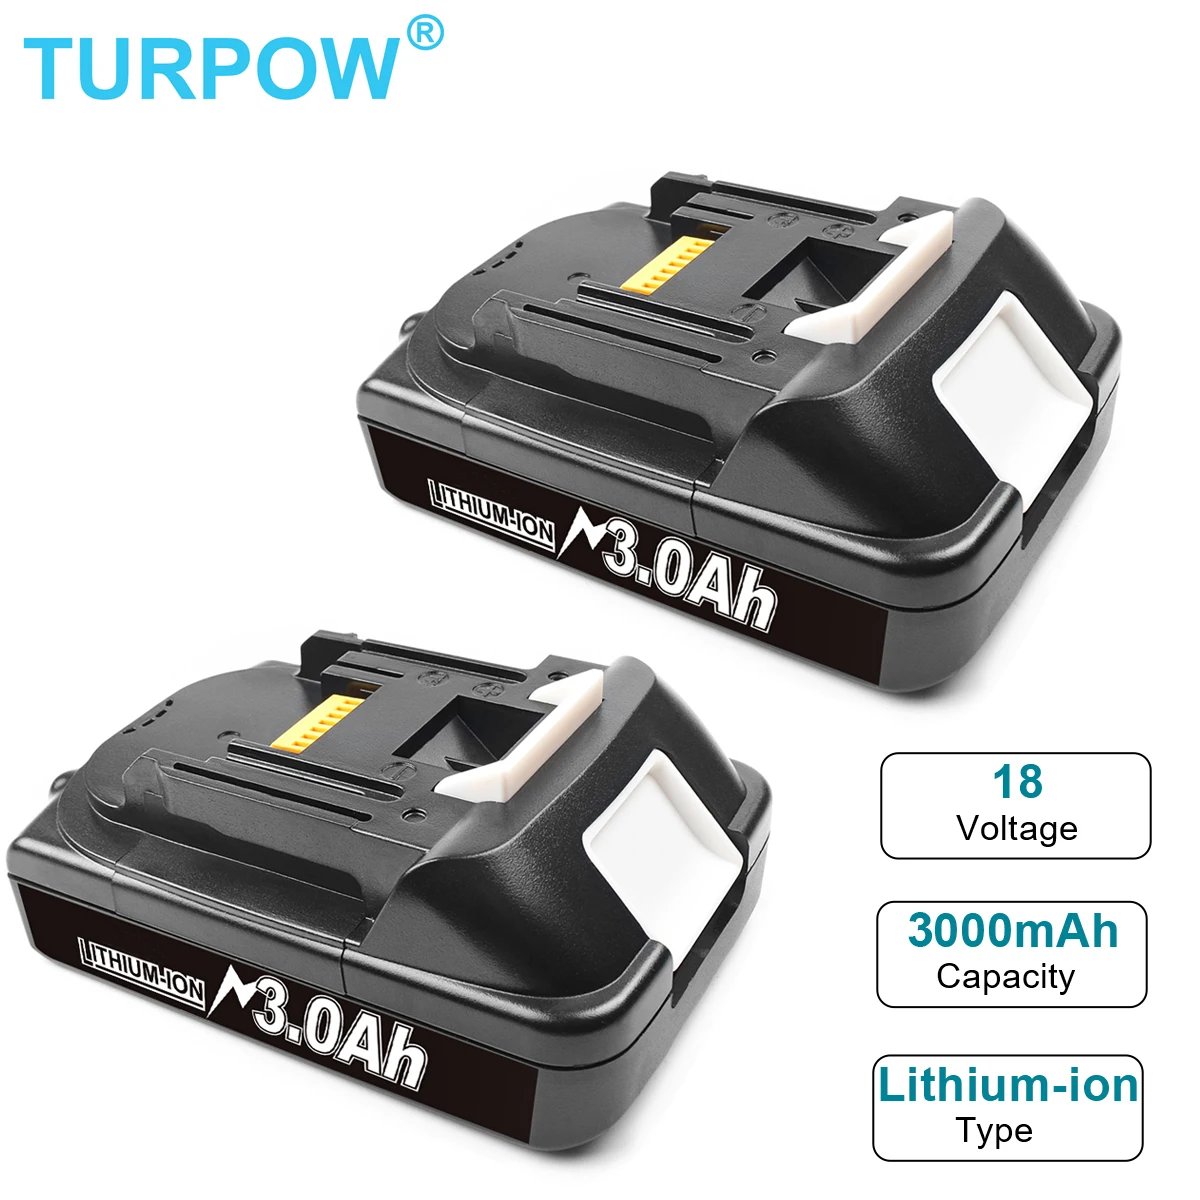 

Turpow BL1815 3000mAh Battery for Makita 18V BL1860 BL1840 BL1850 BL1830 BL1845 LXT 400 Power Tools Batteries Rechargeable